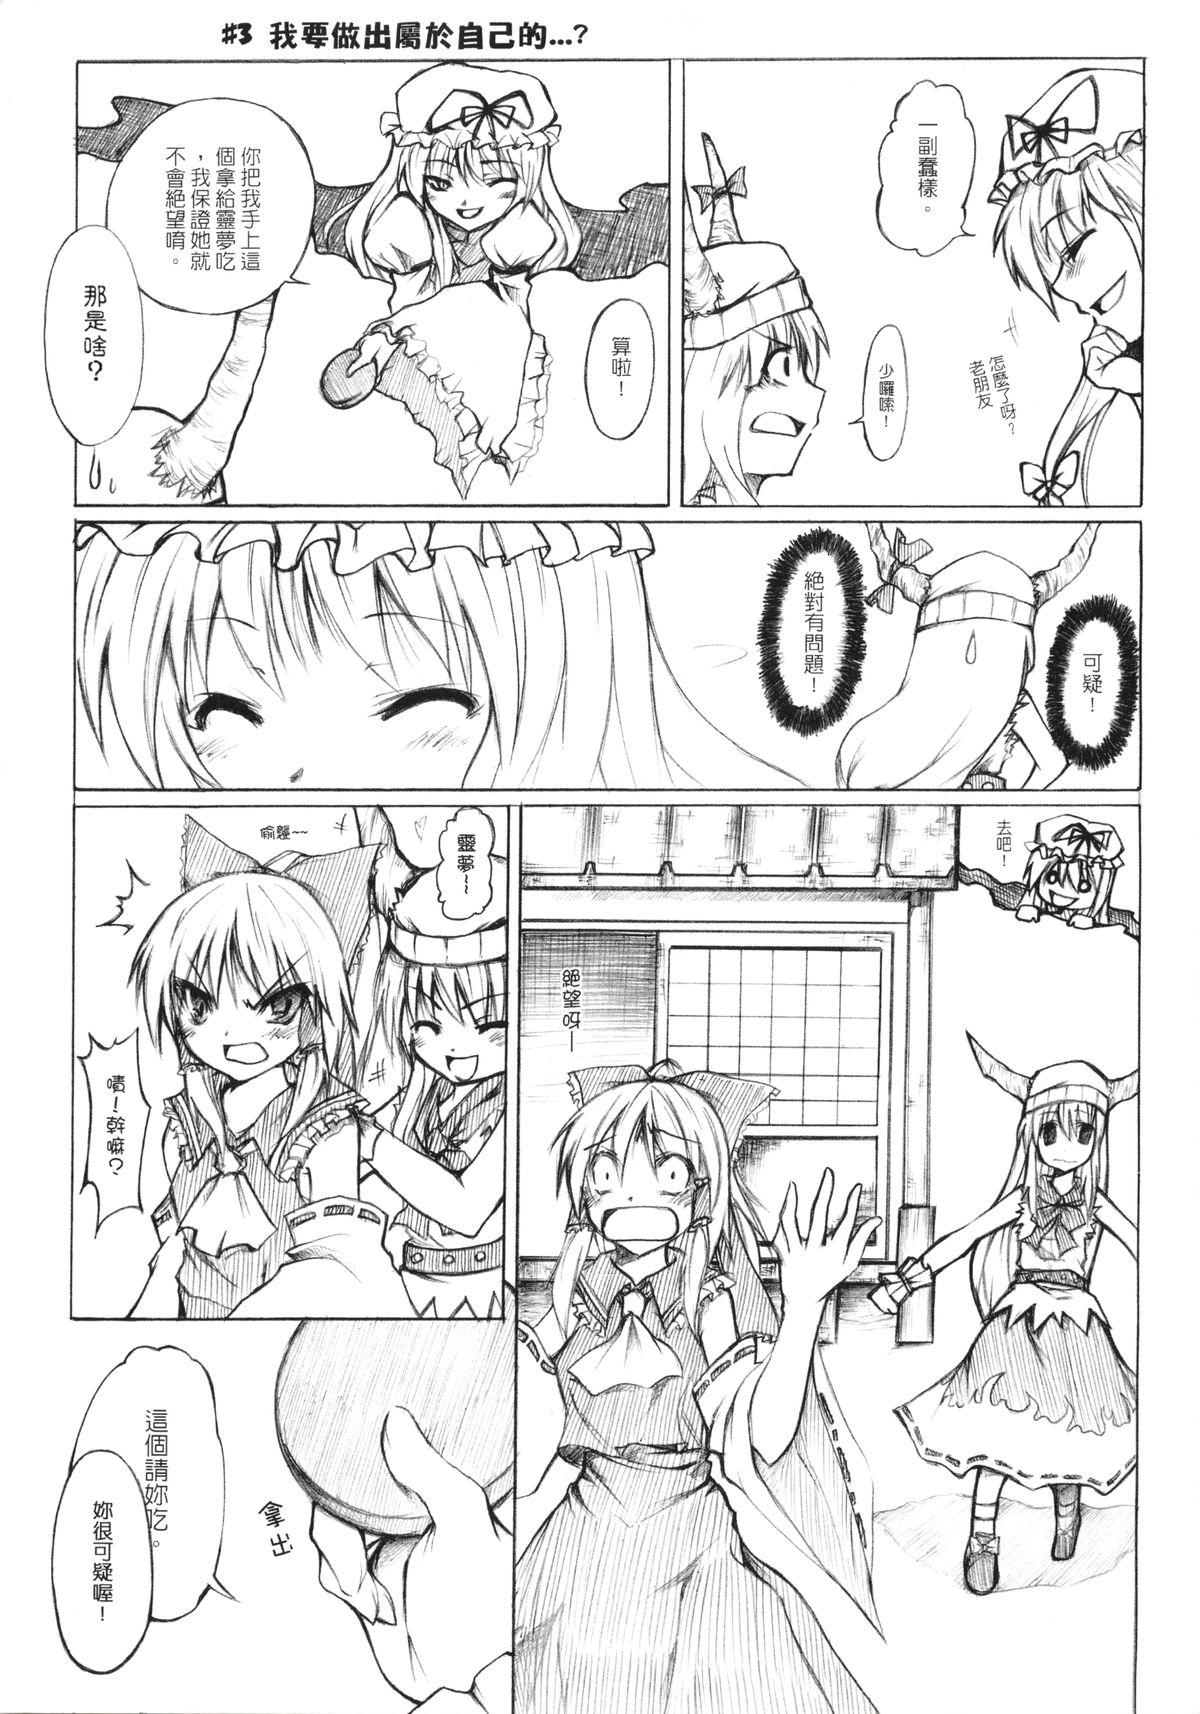 Hard Core Sex 紫隙間Die! - Touhou project Ass Fucked - Page 11